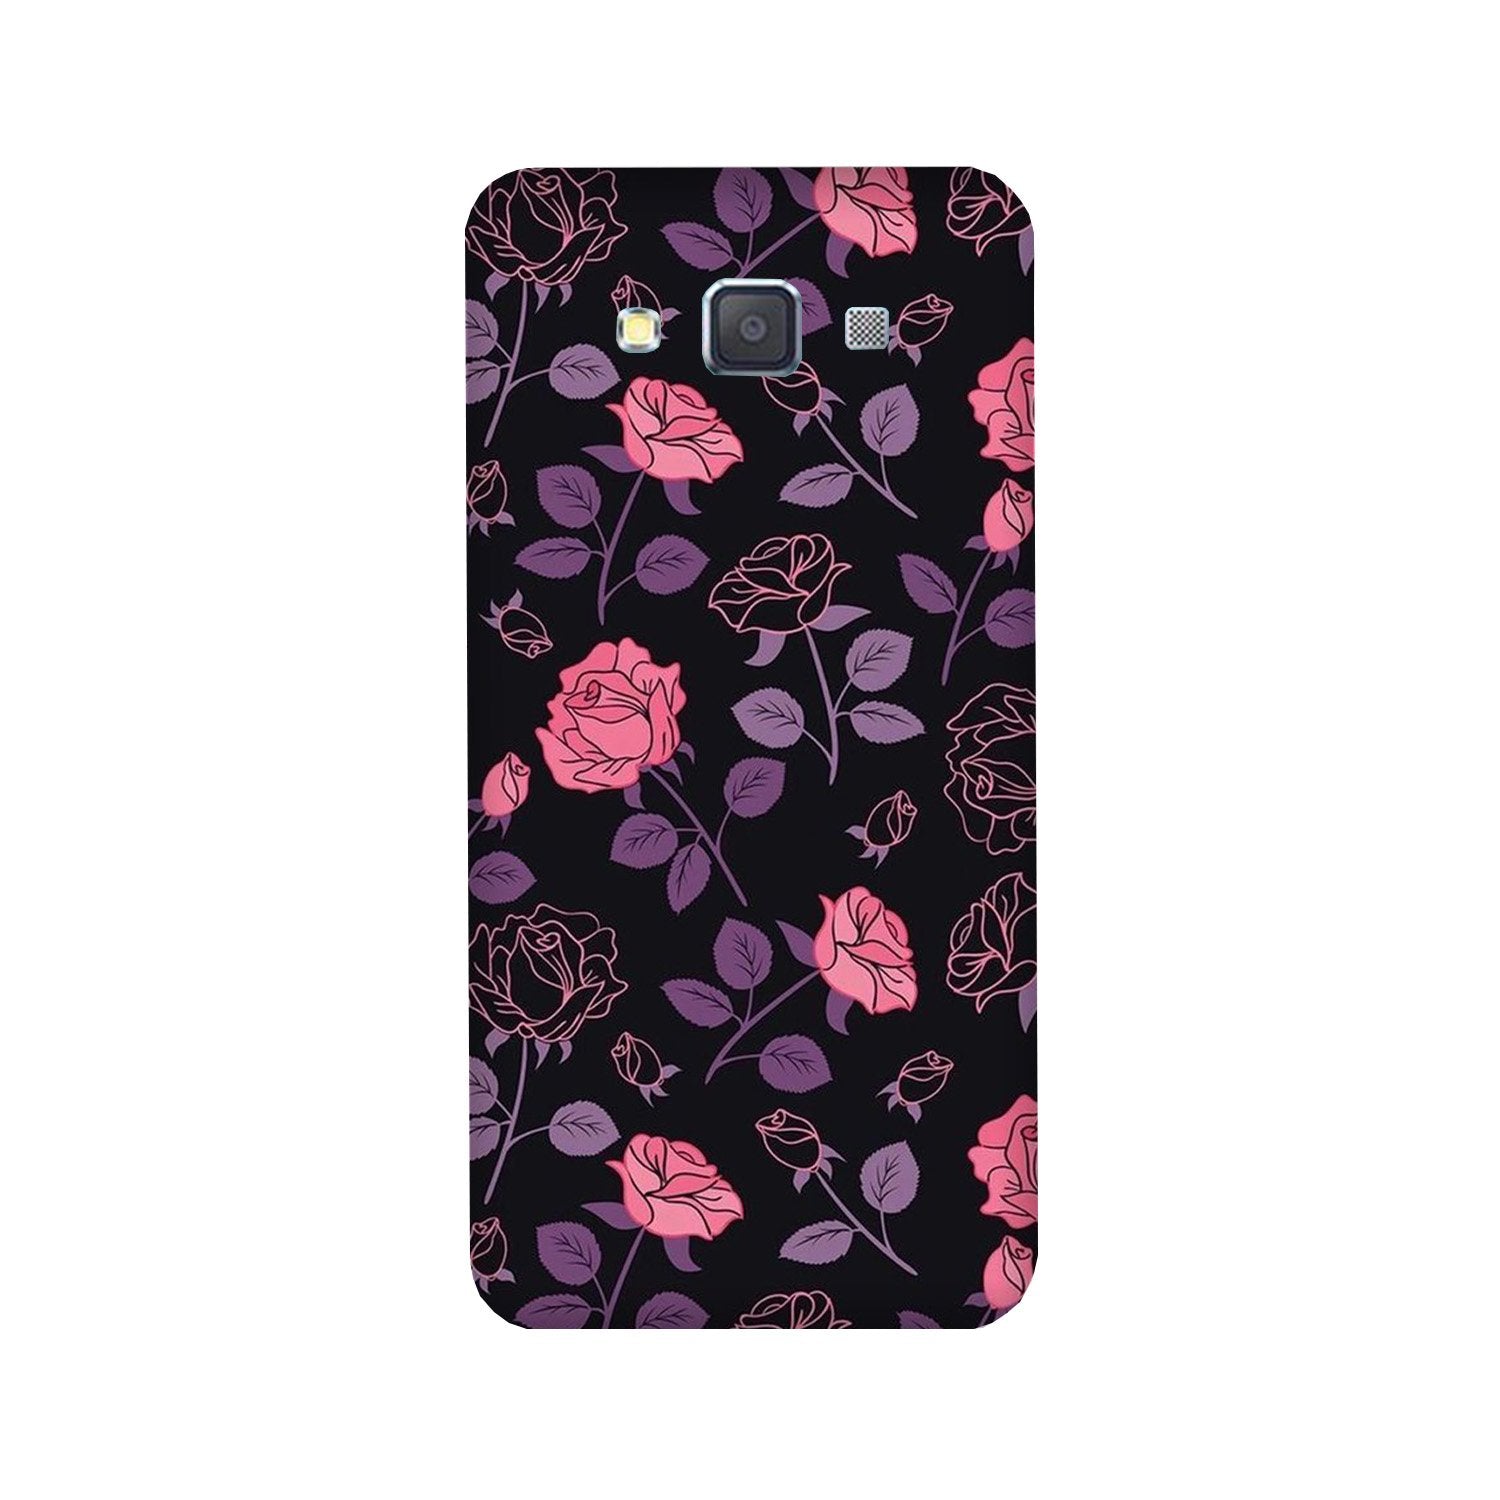 Rose Black Background Case for Galaxy A3 (2015)